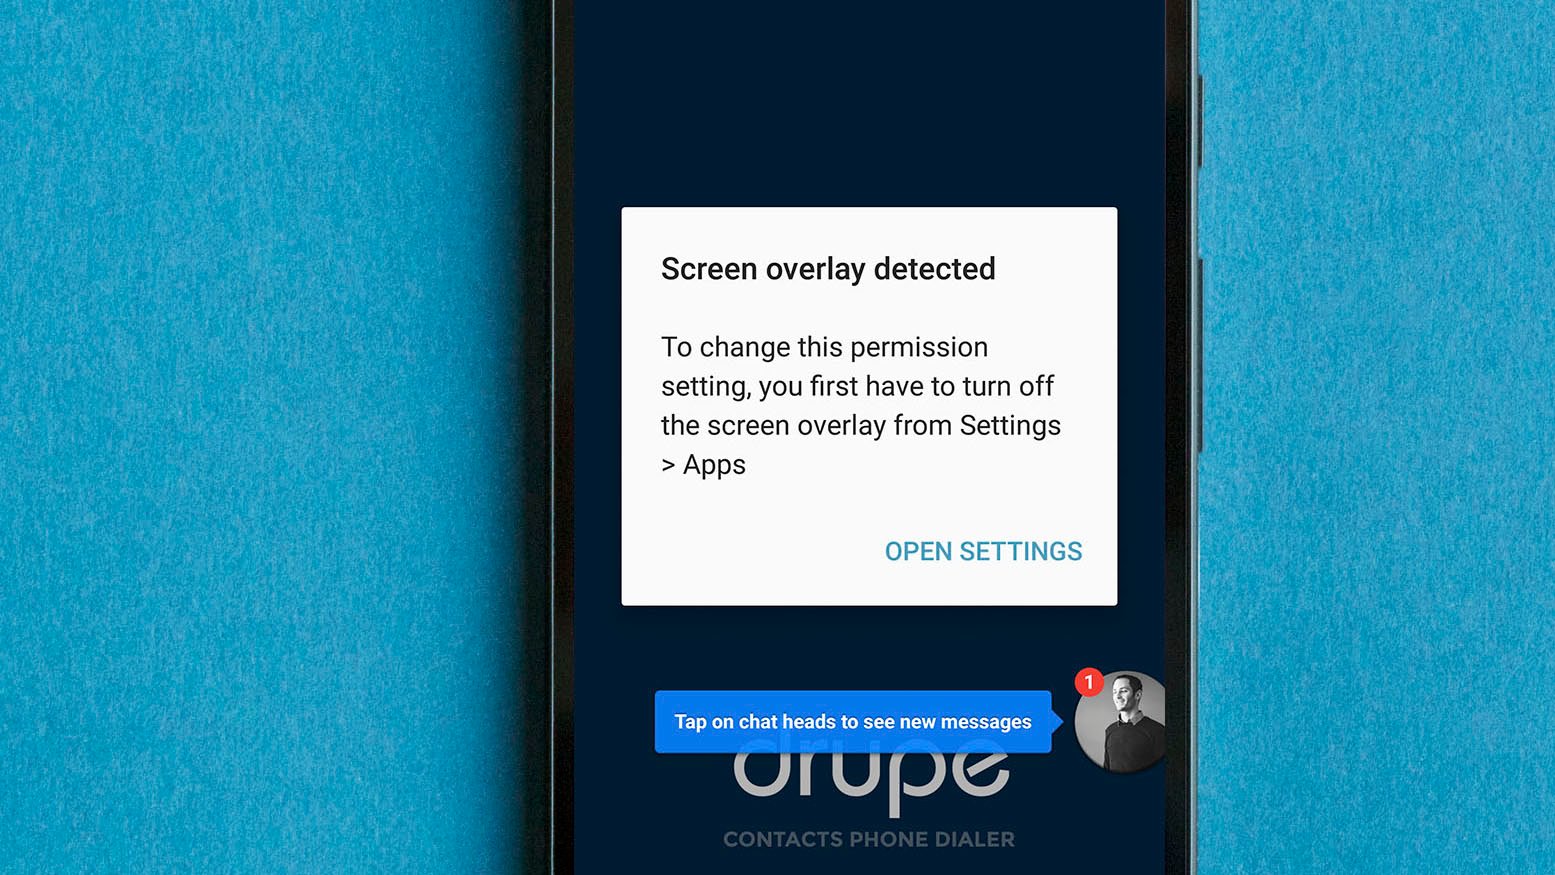 How To Fix Screen Overlay Detected Error Androidpit